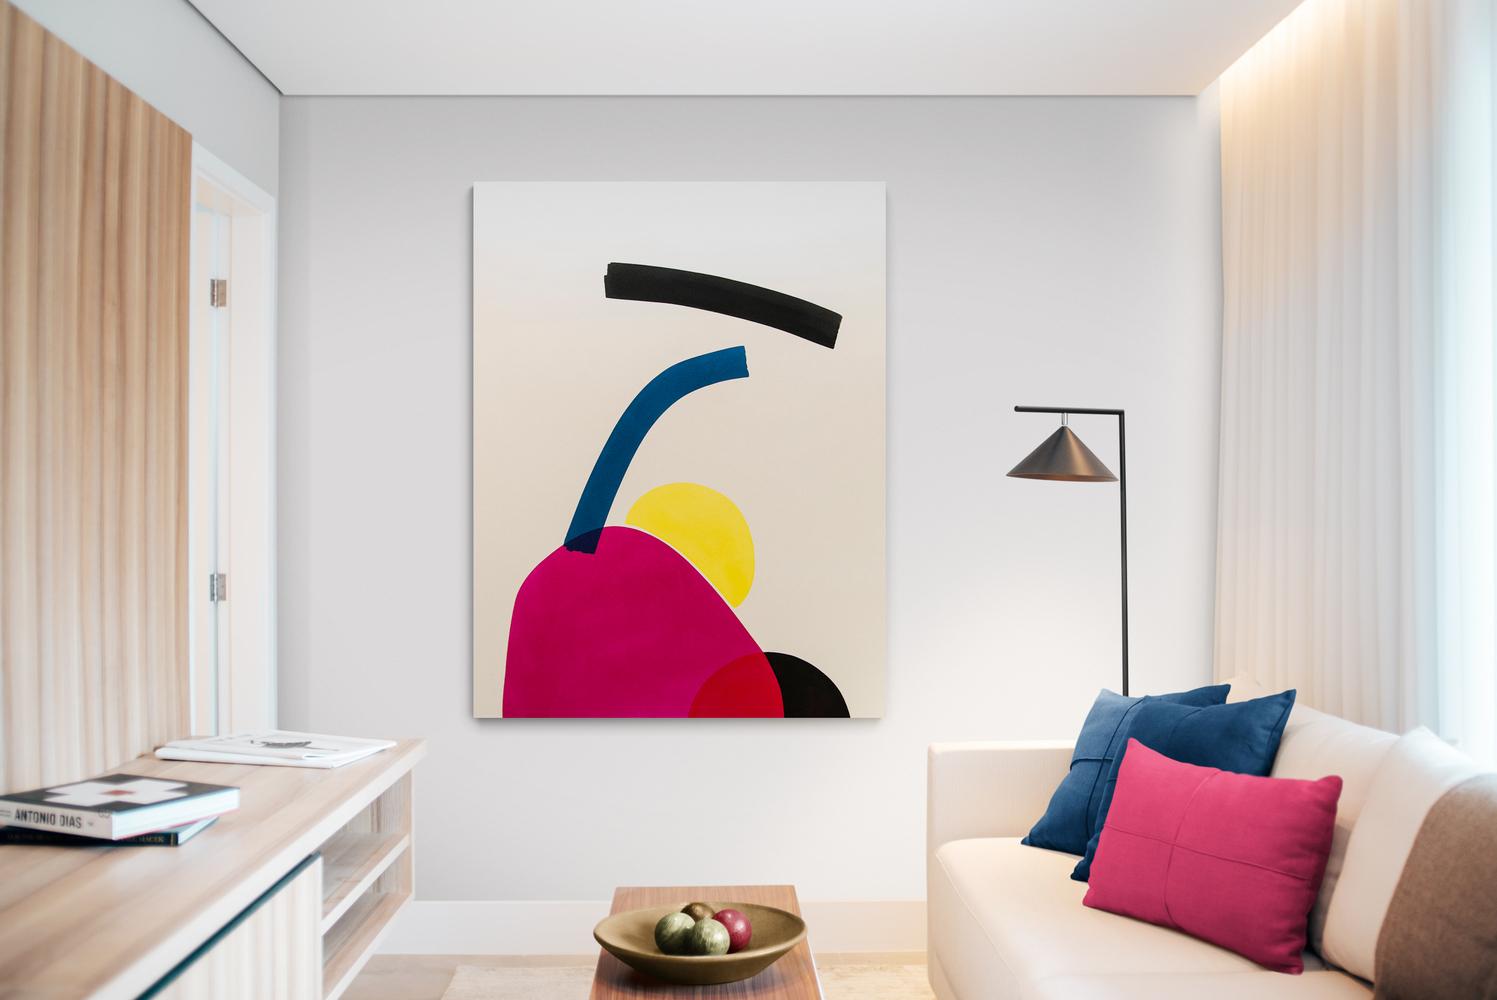 Hiding Sun with Black - bright, colorful, intersecting abstract shapes on canvas - White Abstract Painting by Aron Hill